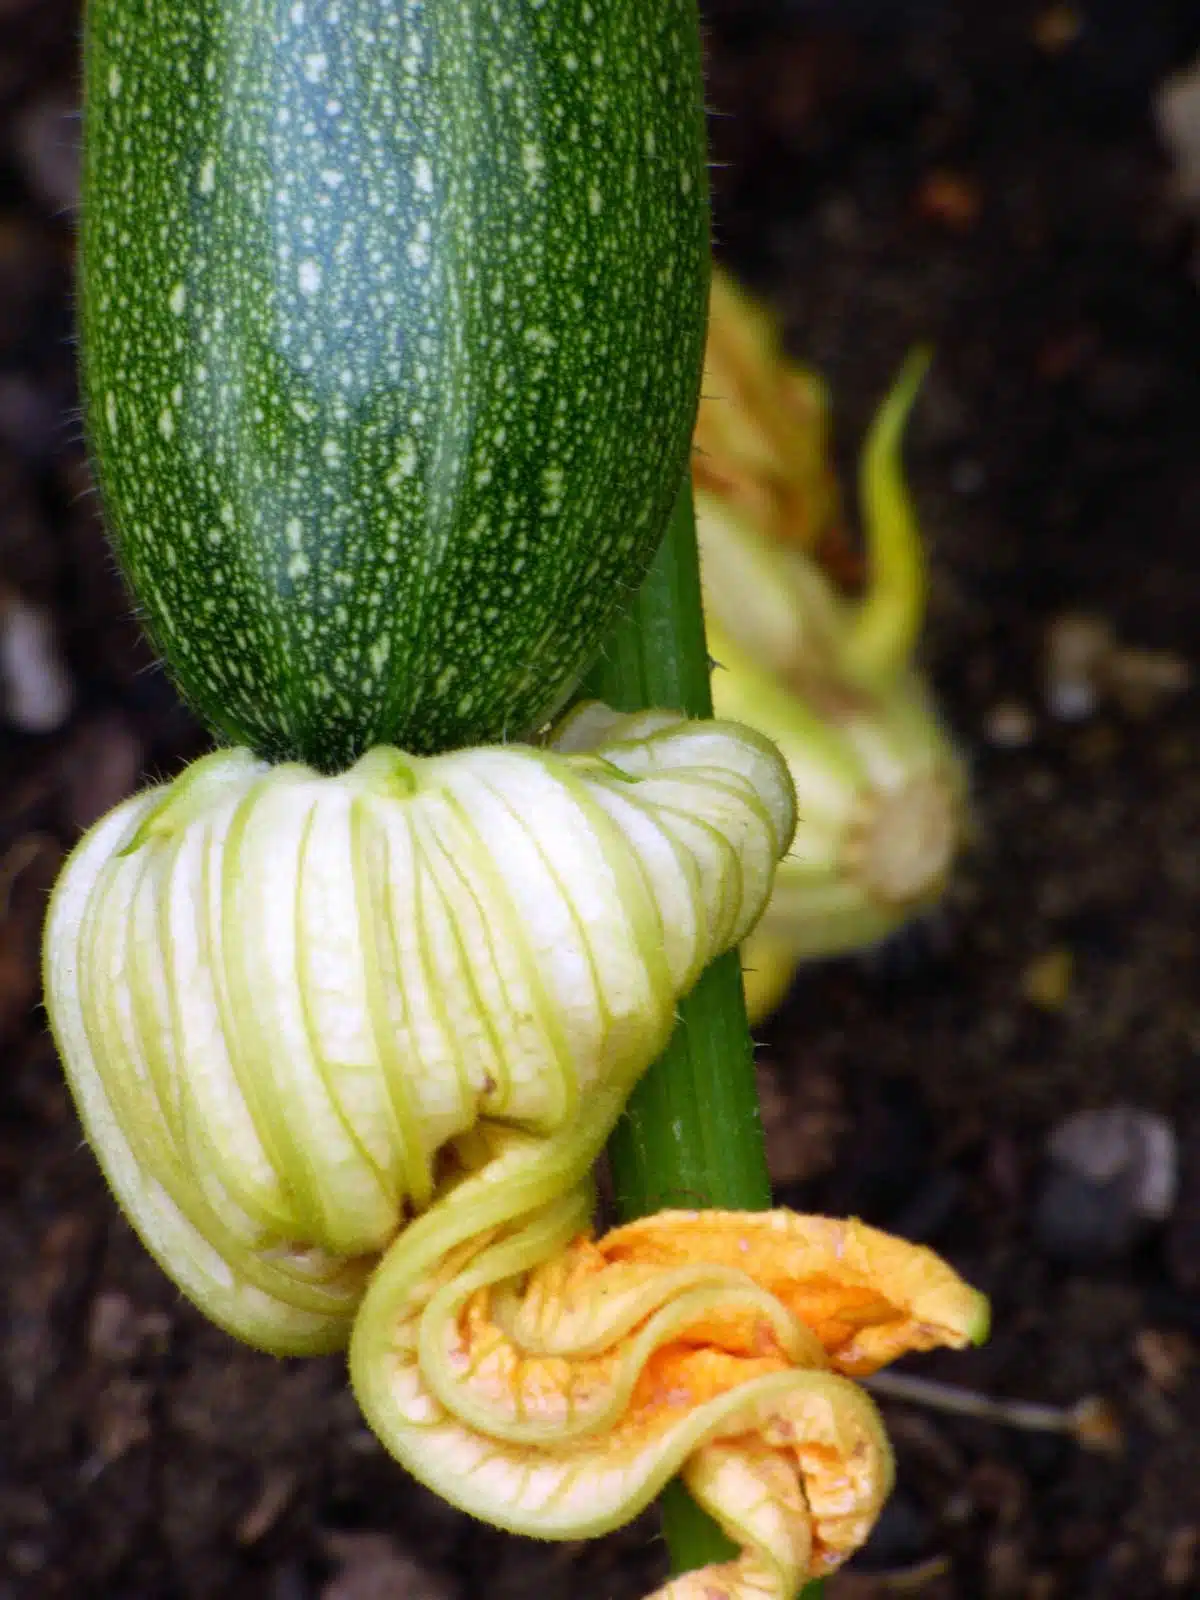 A zucchini plant growing in the garden. One zucchini has formed with a zucchini flower at the end.